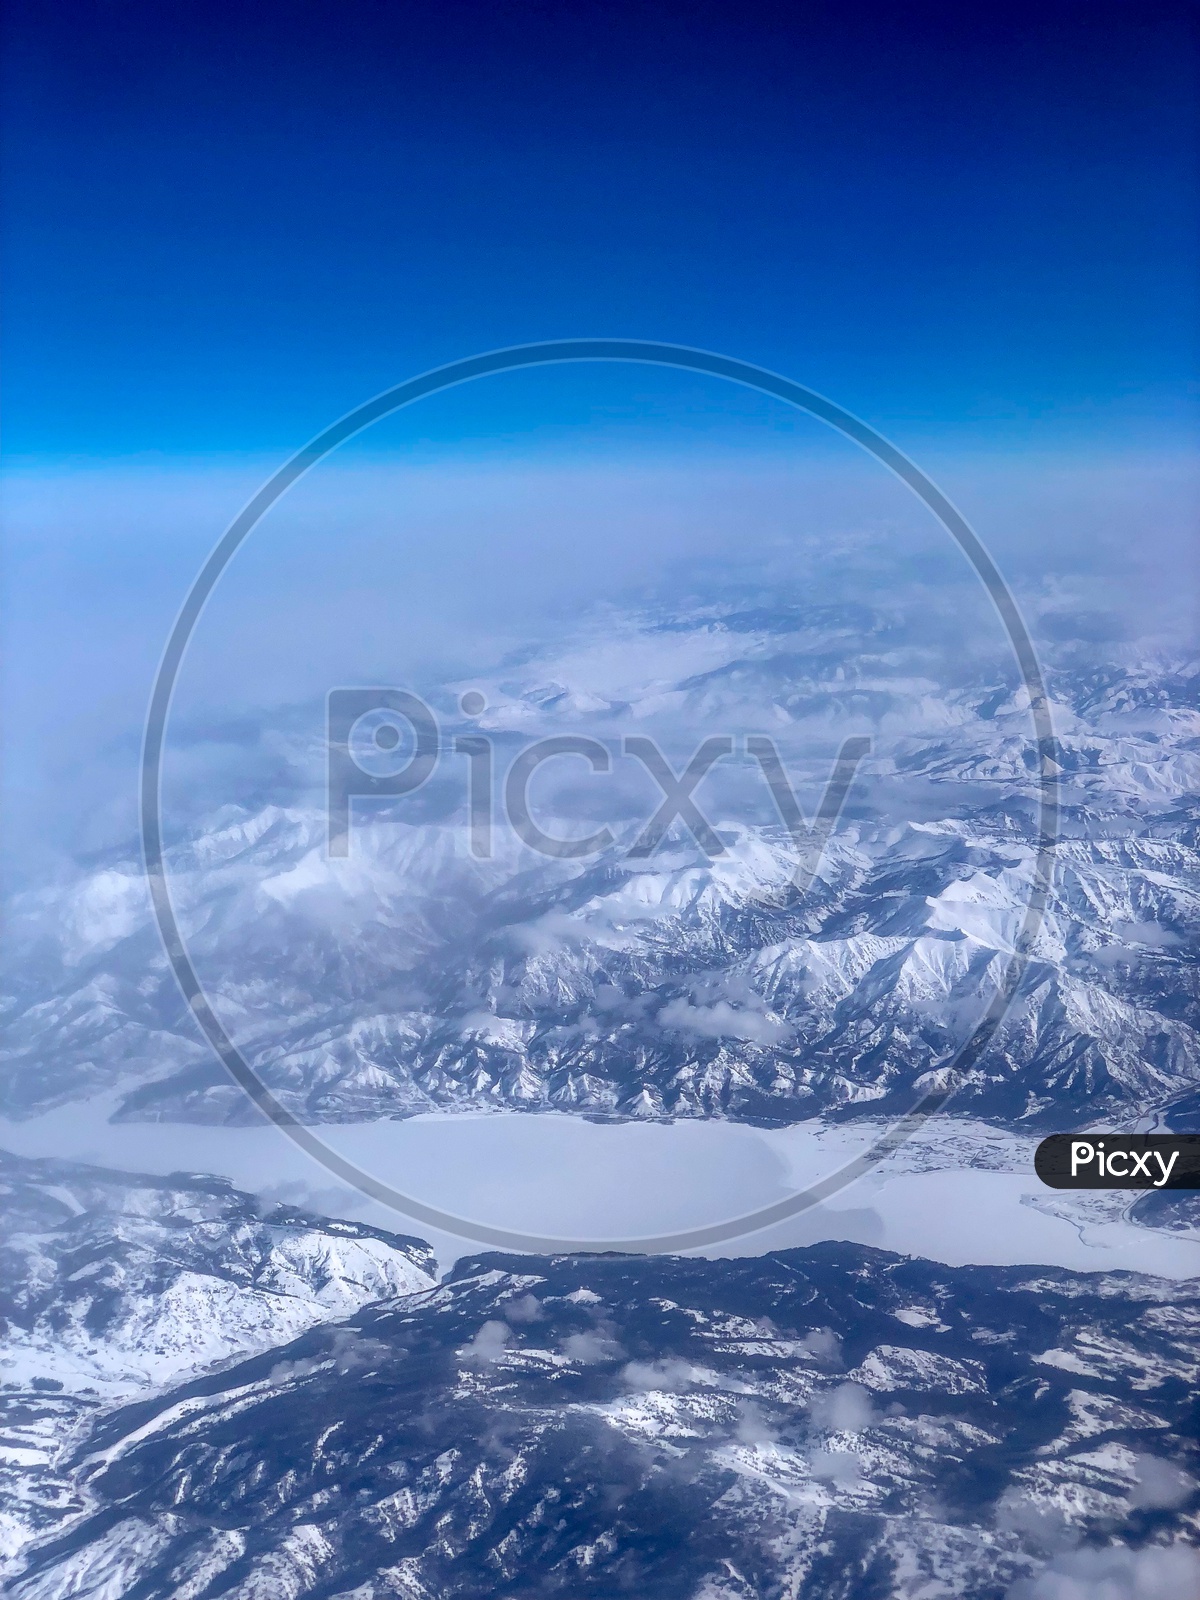 Ariel View of Snow Capped Mountains, Clouds , Blue Sky &  Frozen lake